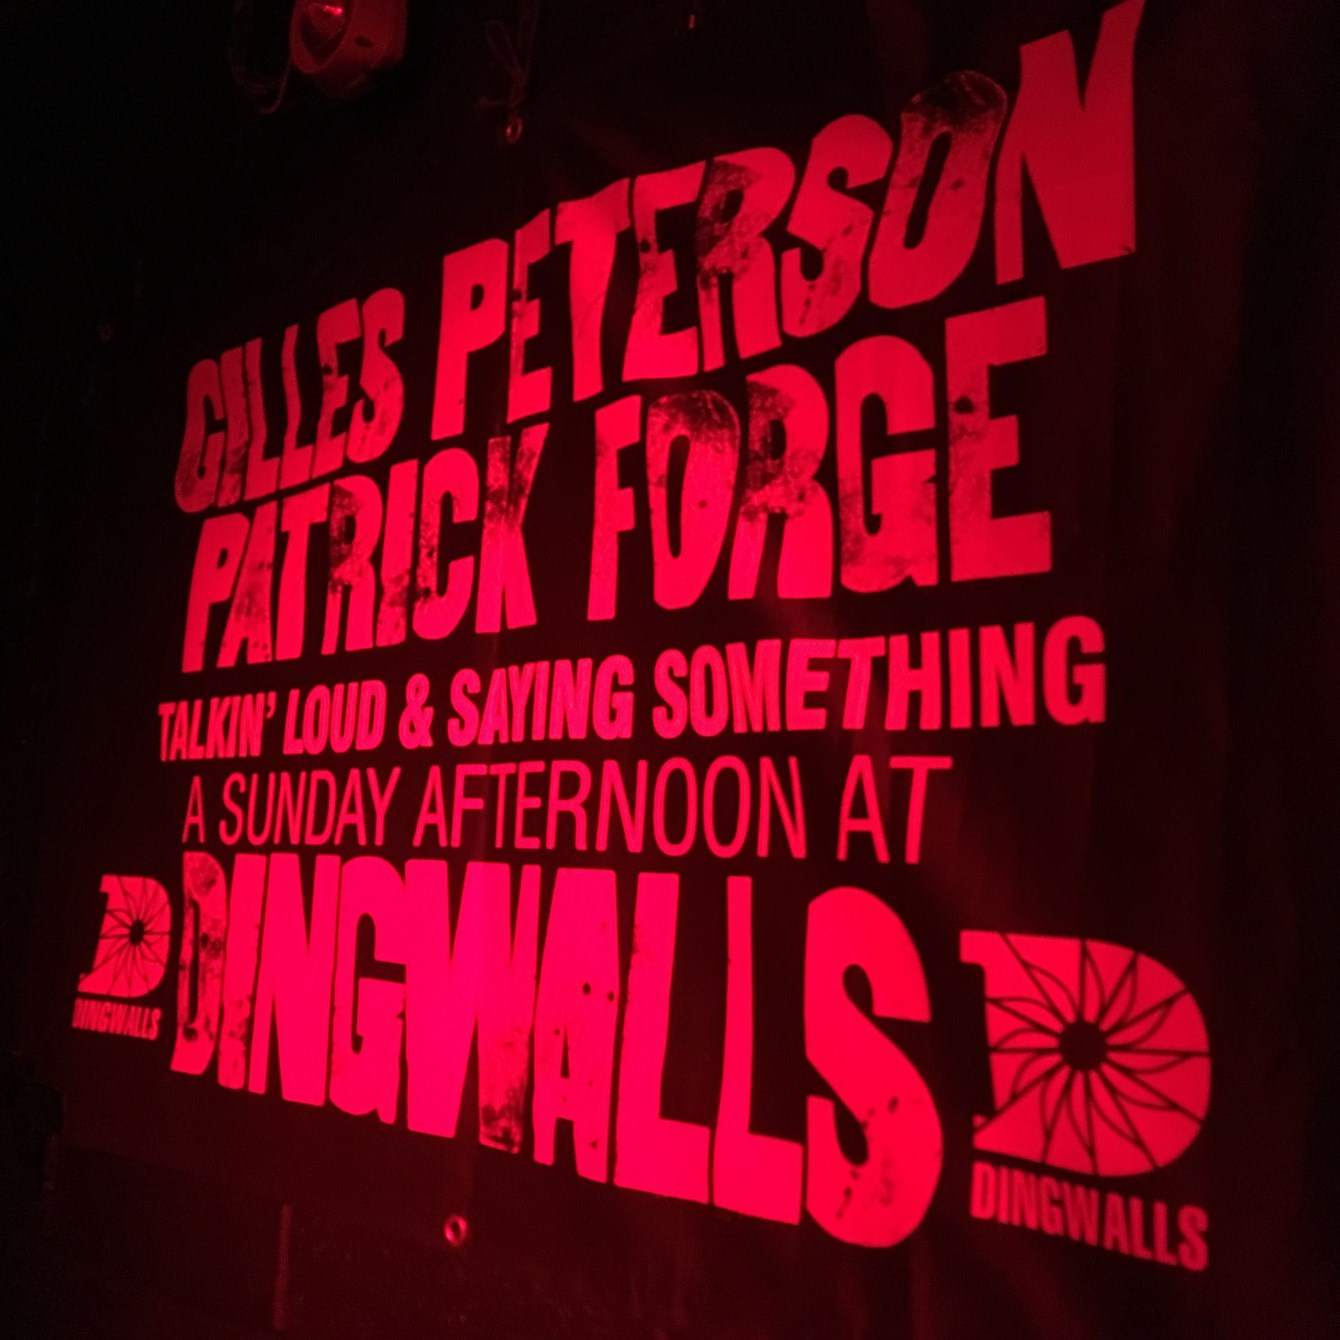 Gilles Peterson & Patrick Forge present Another Sunday Afternoon - Página trasera